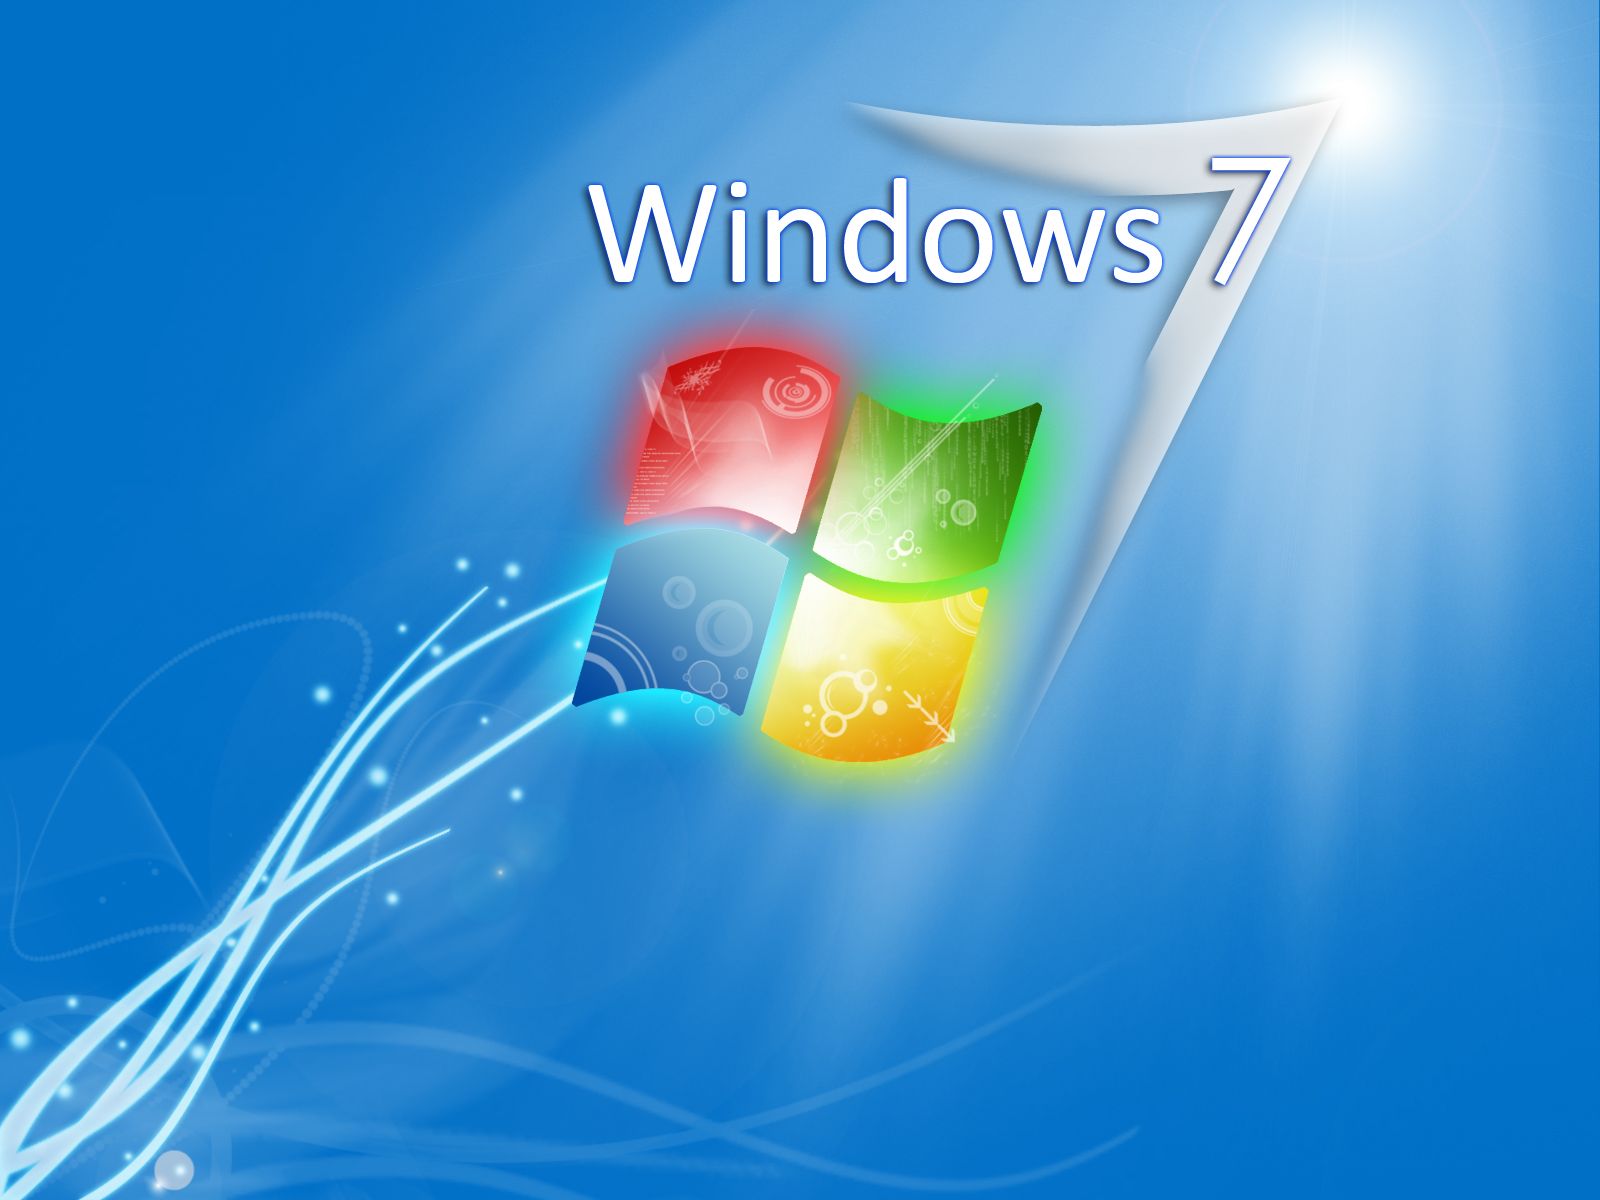 Download Hd Wallpapers For Windows 7